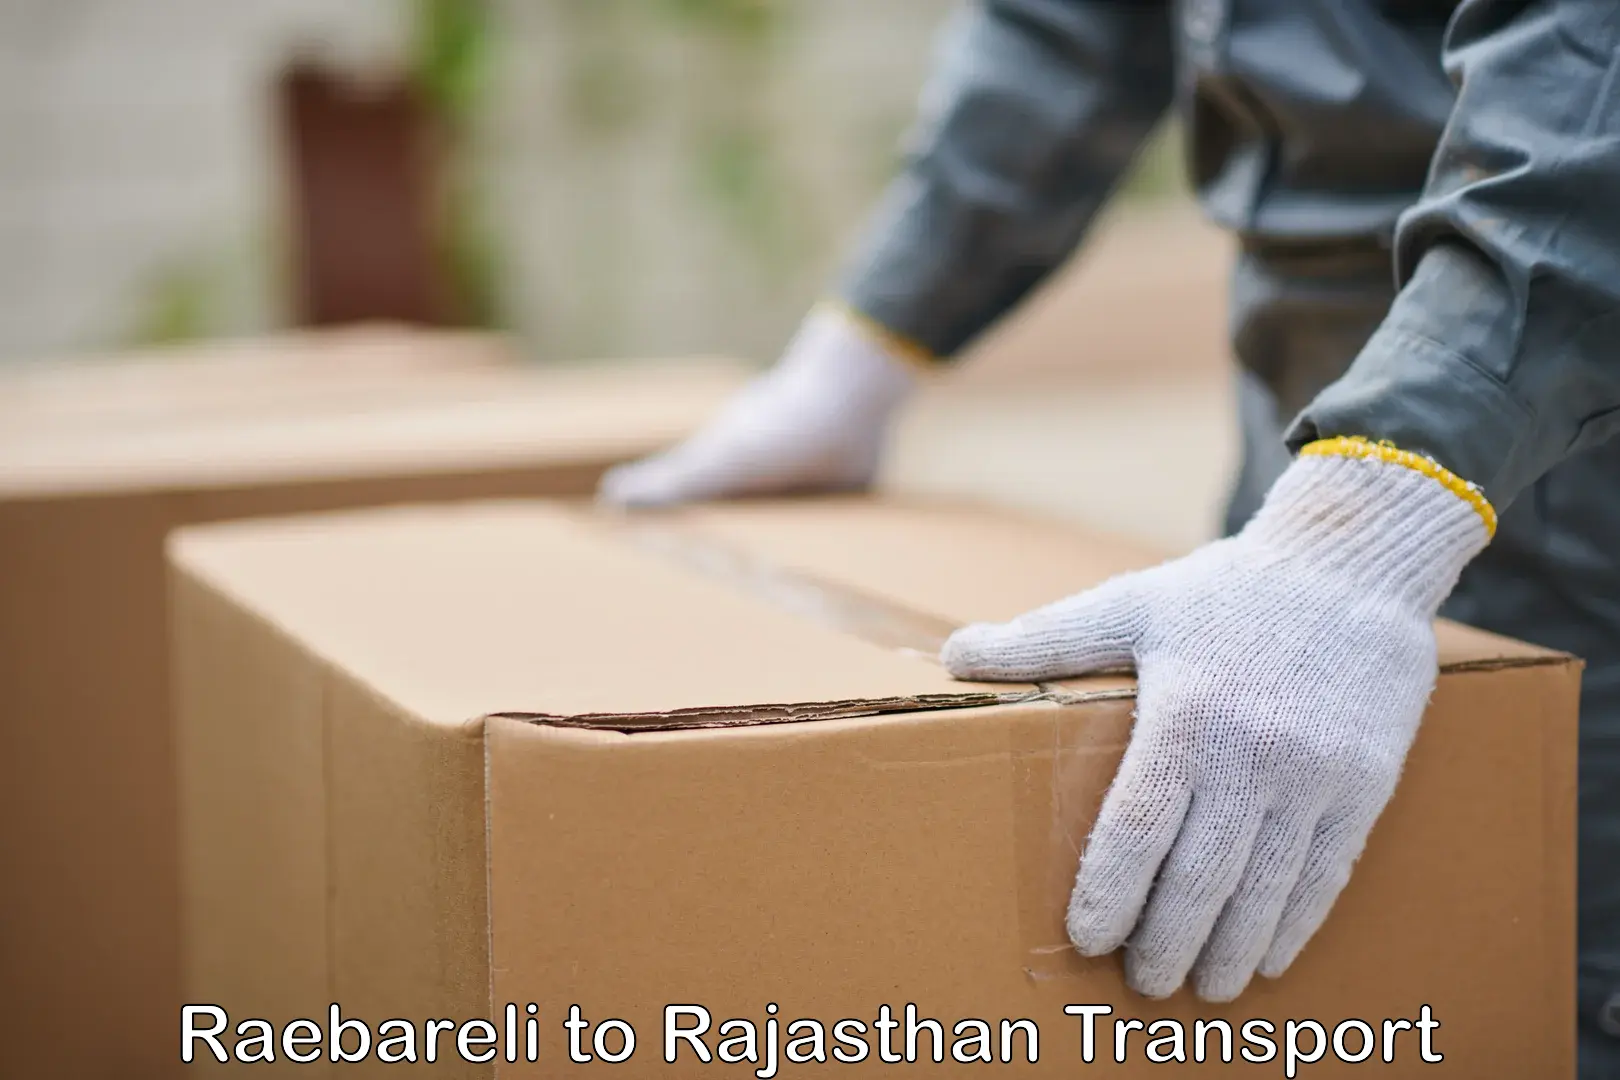 Delivery service Raebareli to Rajasthan